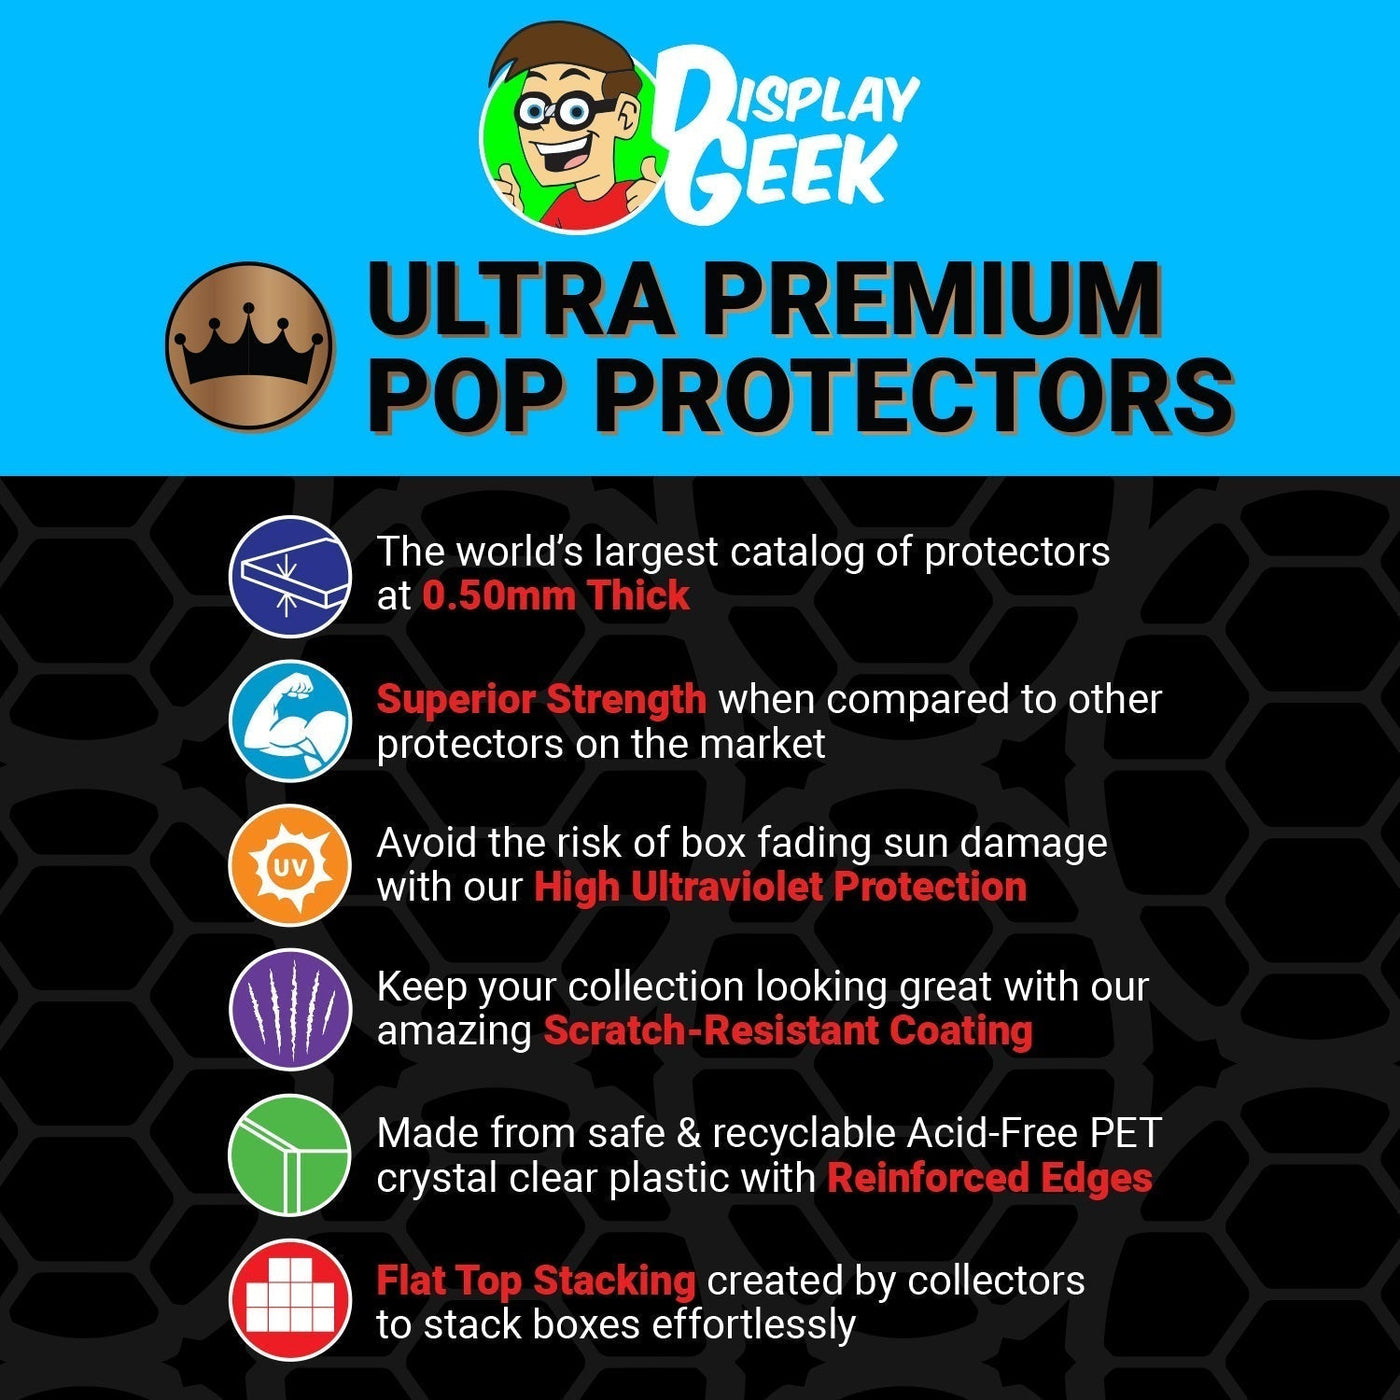 Pop Protector for Funkoverse Space Jam A New Legacy 100 Funko 2 Pack on The Protector Guide App by Display Geek